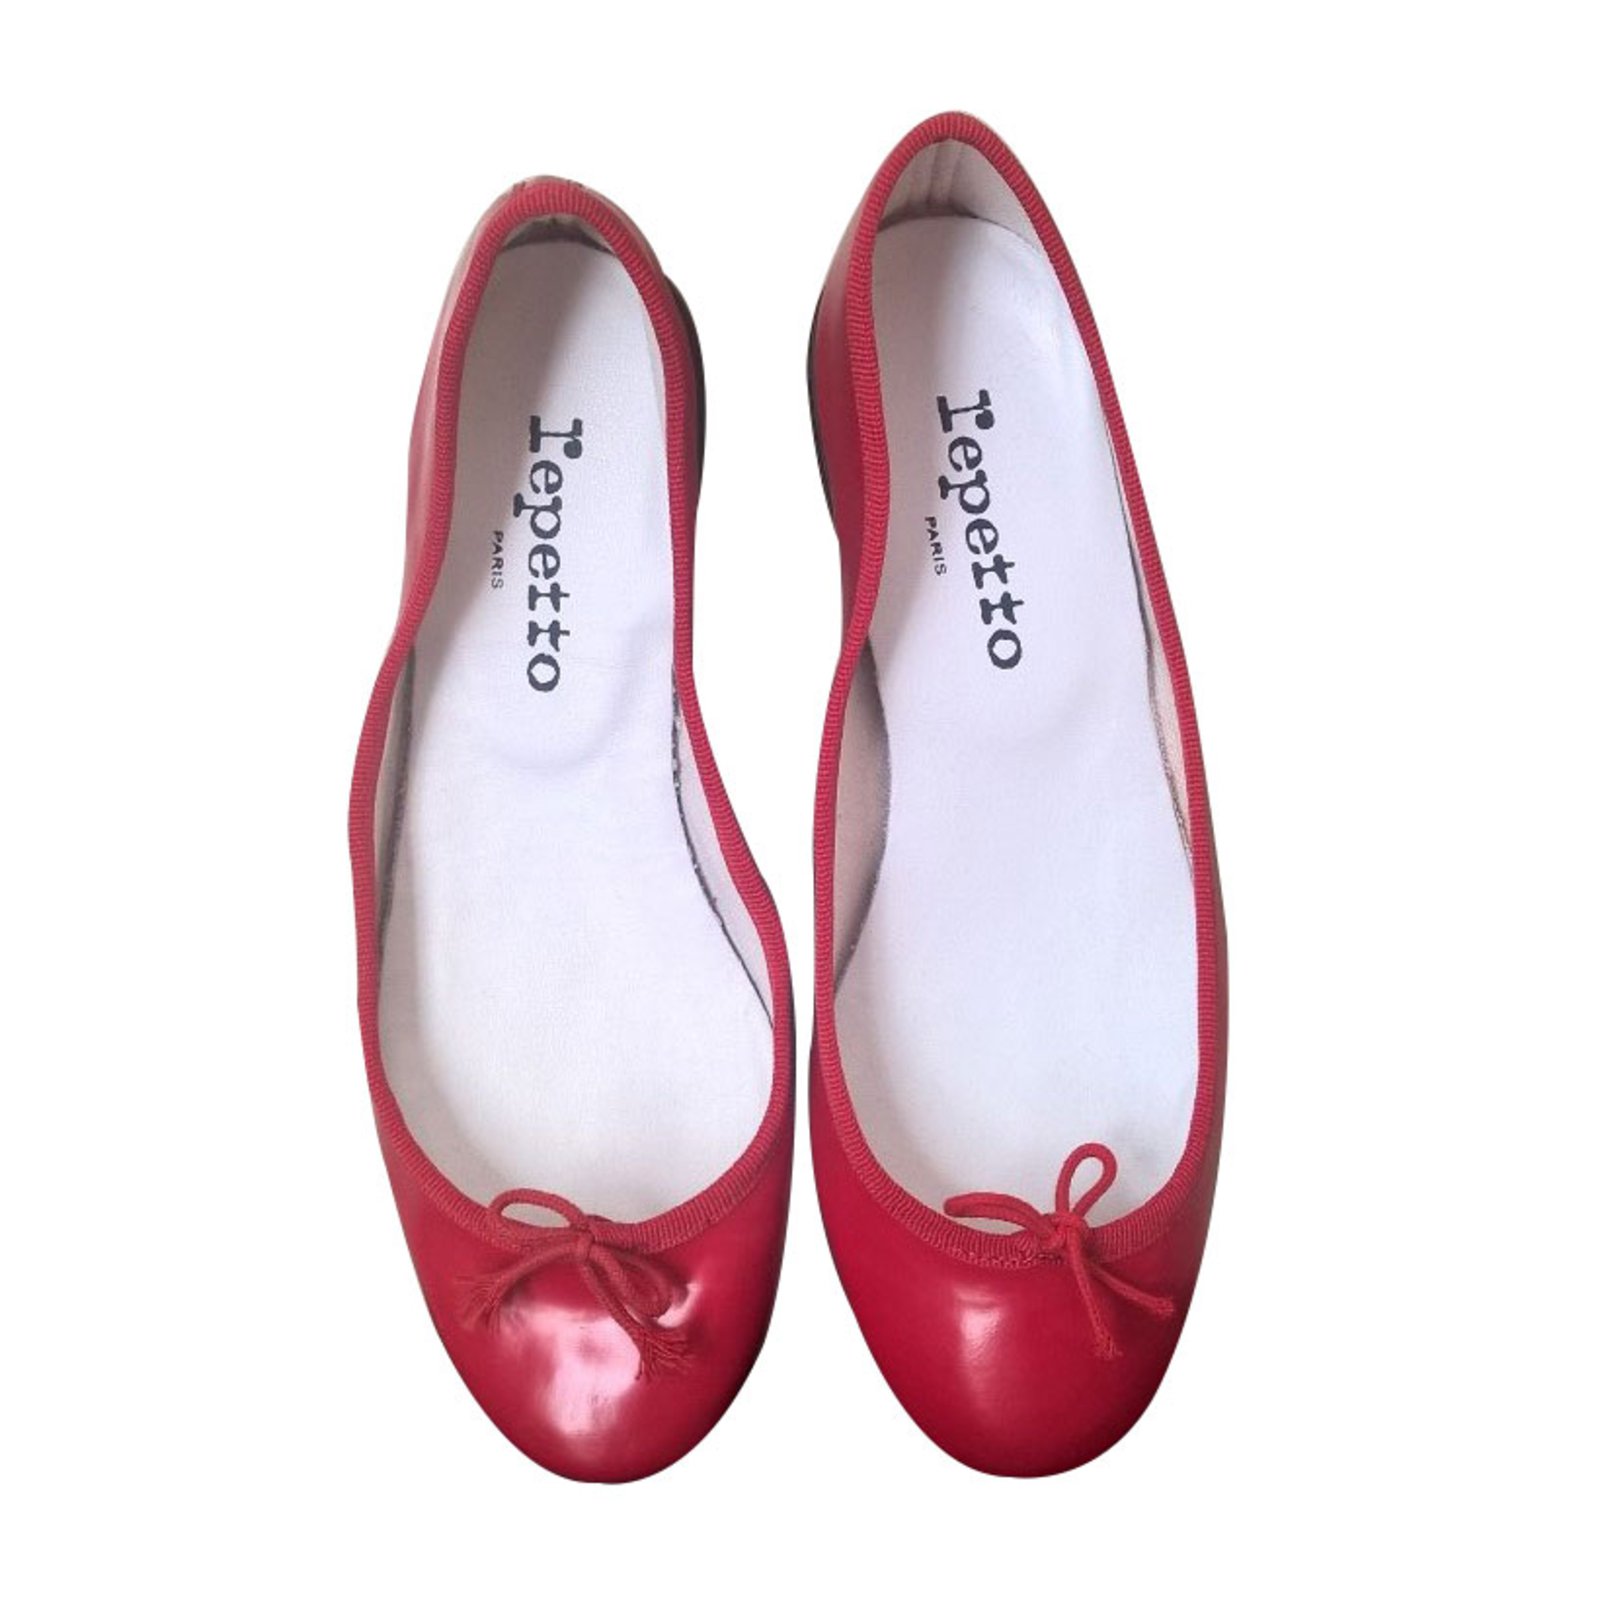 married Insanity soul repetto red ballet flats Mayor major In honor